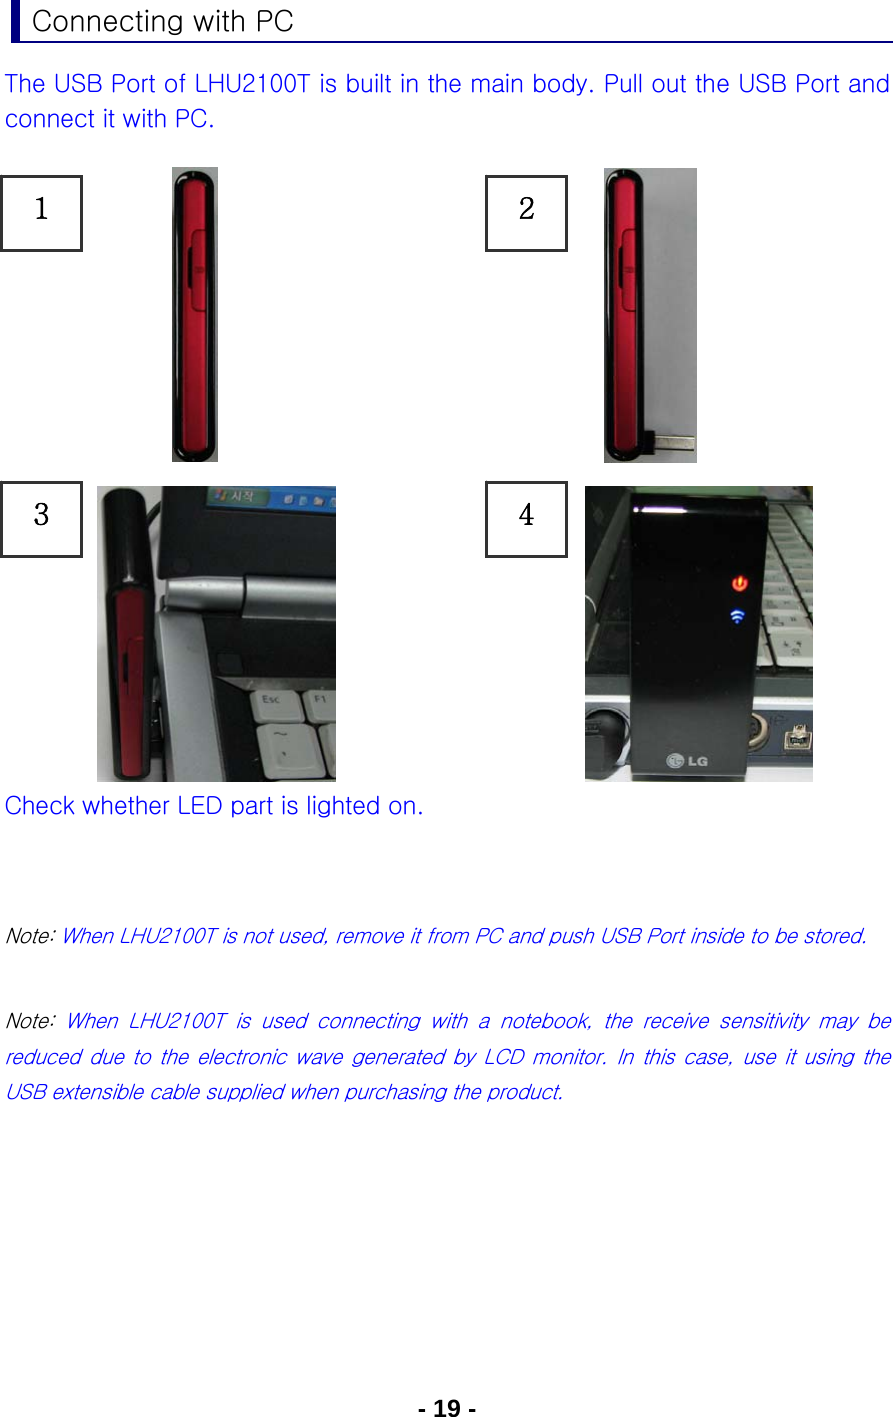 - 19 - Connecting with PC The USB Port of LHU2100T is built in the main body. Pull out the USB Port and connect it with PC.                Check whether LED part is lighted on.   Note: When LHU2100T is not used, remove it from PC and push USB Port inside to be stored.  Note:  When  LHU2100T  is  used  connecting  with  a  notebook,  the  receive  sensitivity  may  be reduced due to the electronic wave generated by LCD monitor. In this case, use it using the USB extensible cable supplied when purchasing the product.       1 3 2 4 